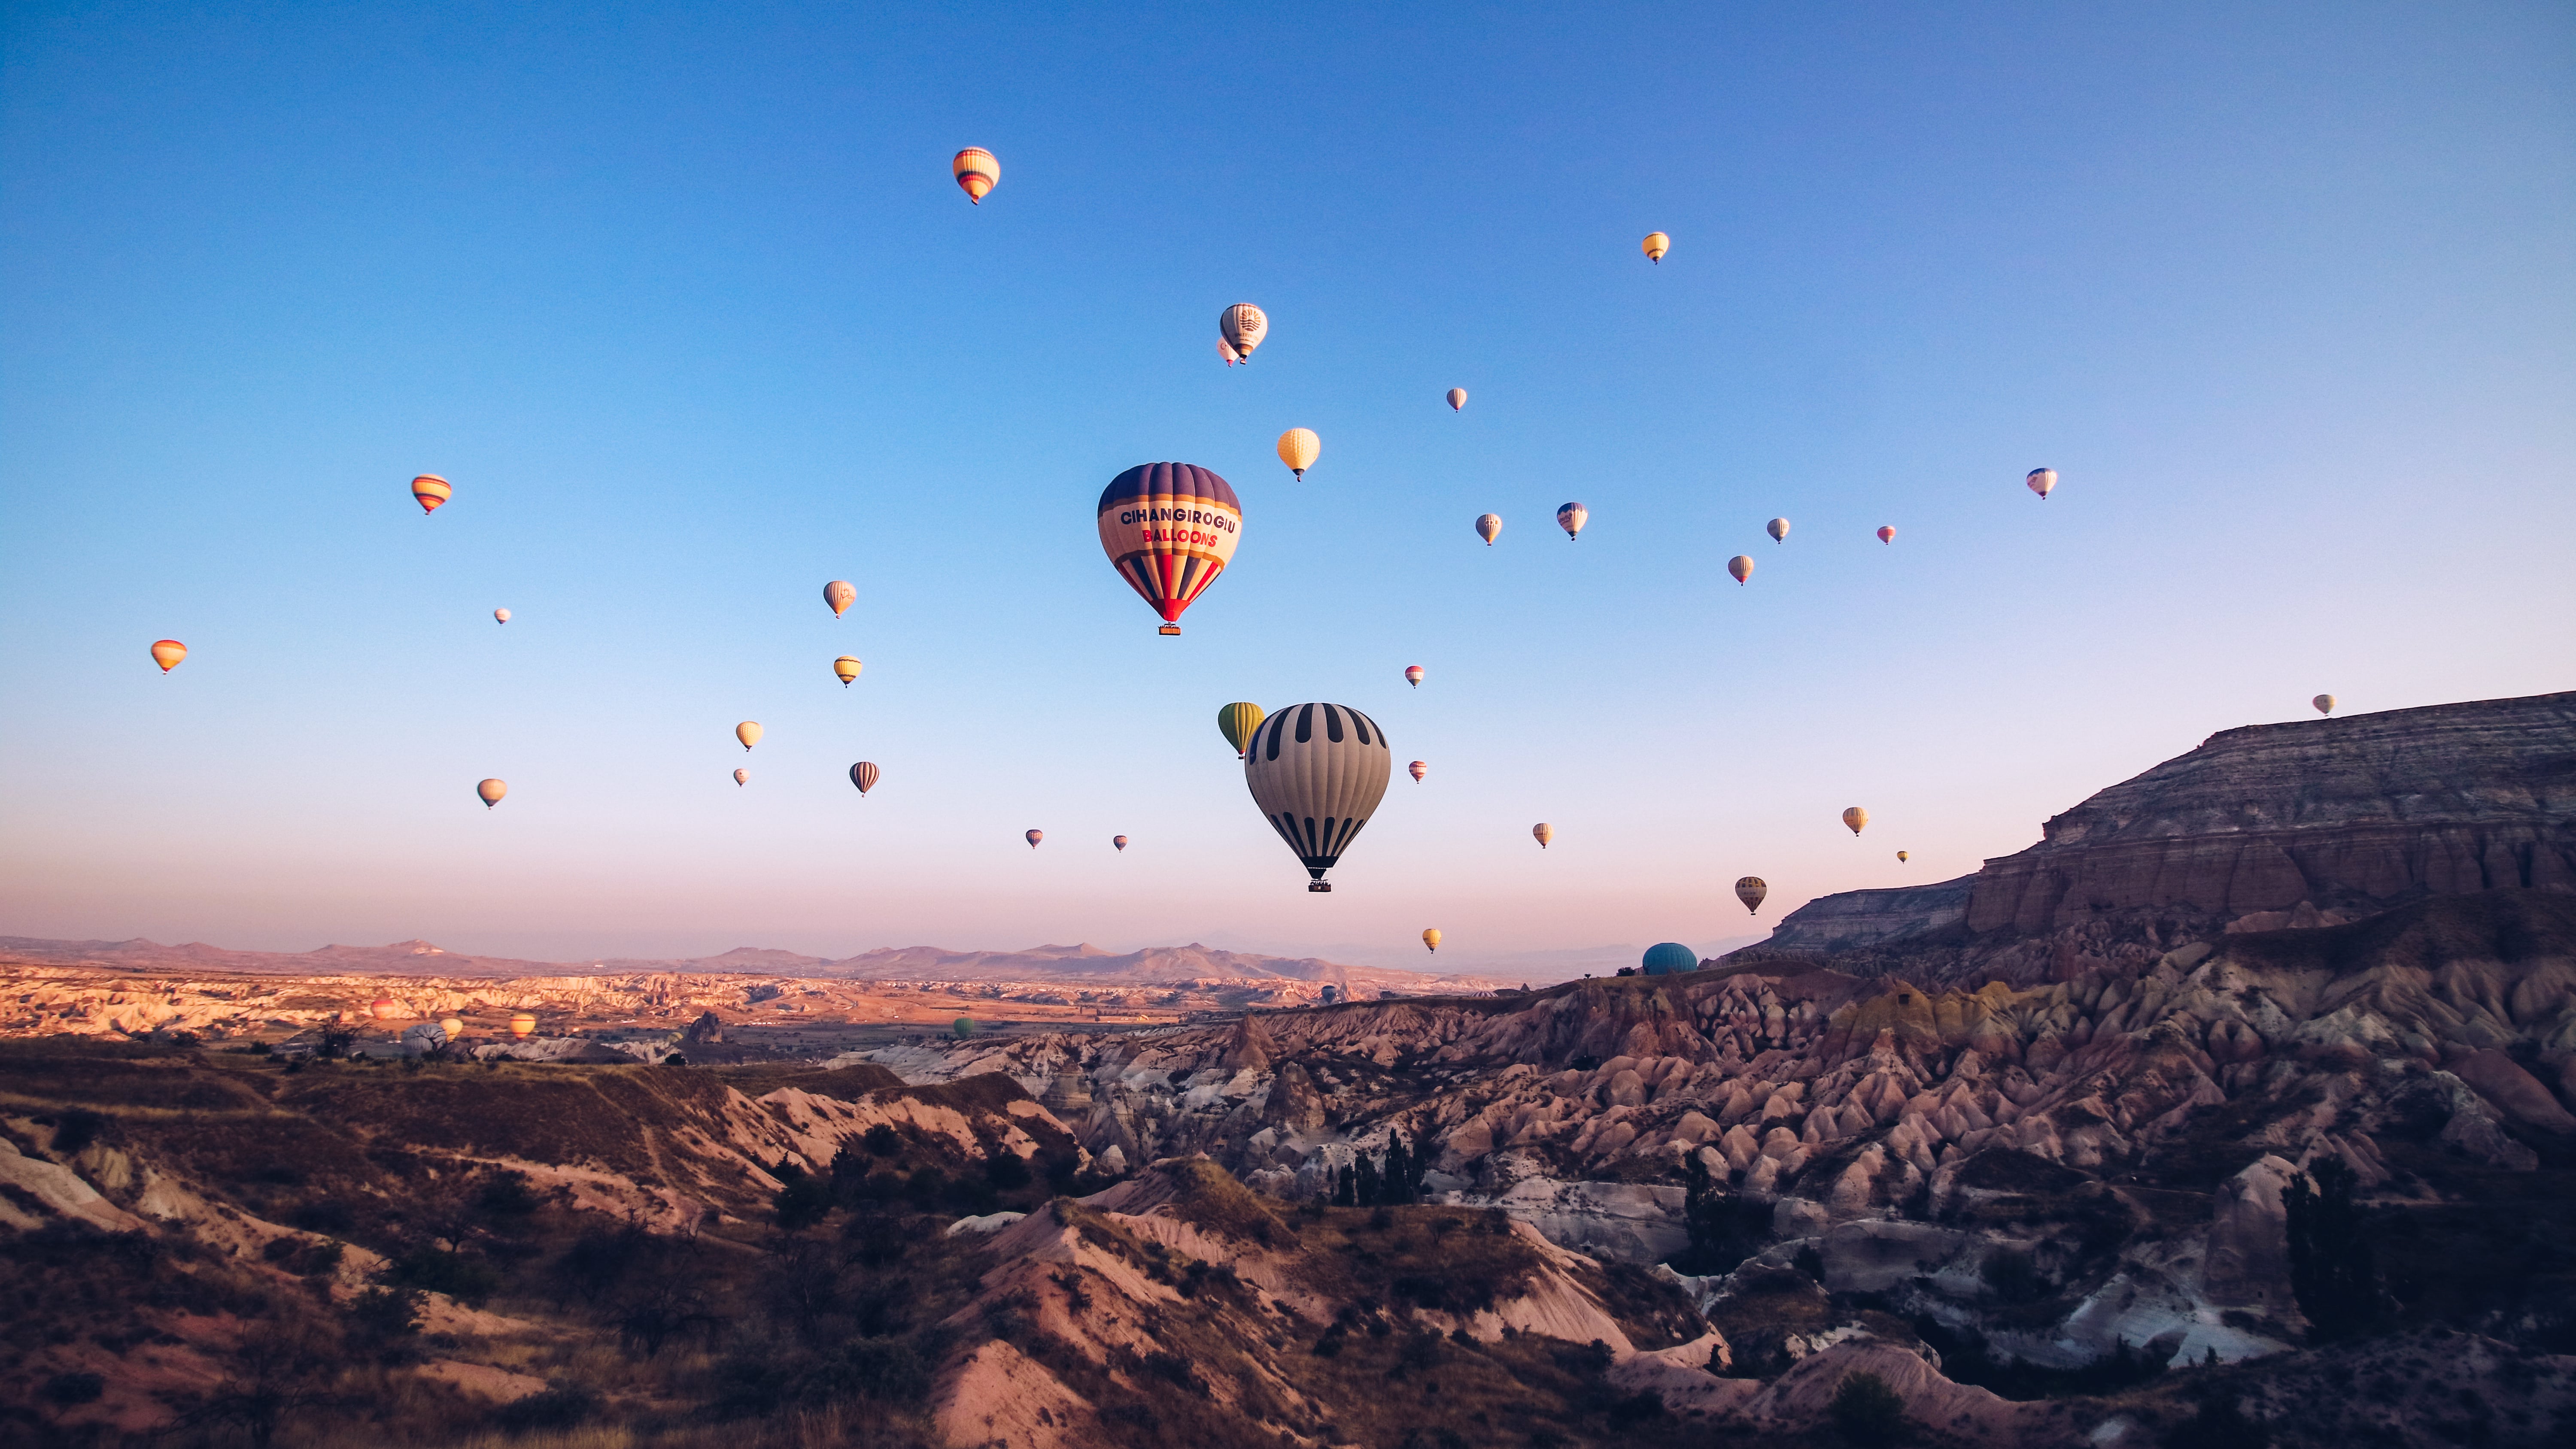 OUR ADVENTUROUS HIKE THROUGH CAPPADOCIA: BEST PLACE TO SEE HOT AIR BALLOONS